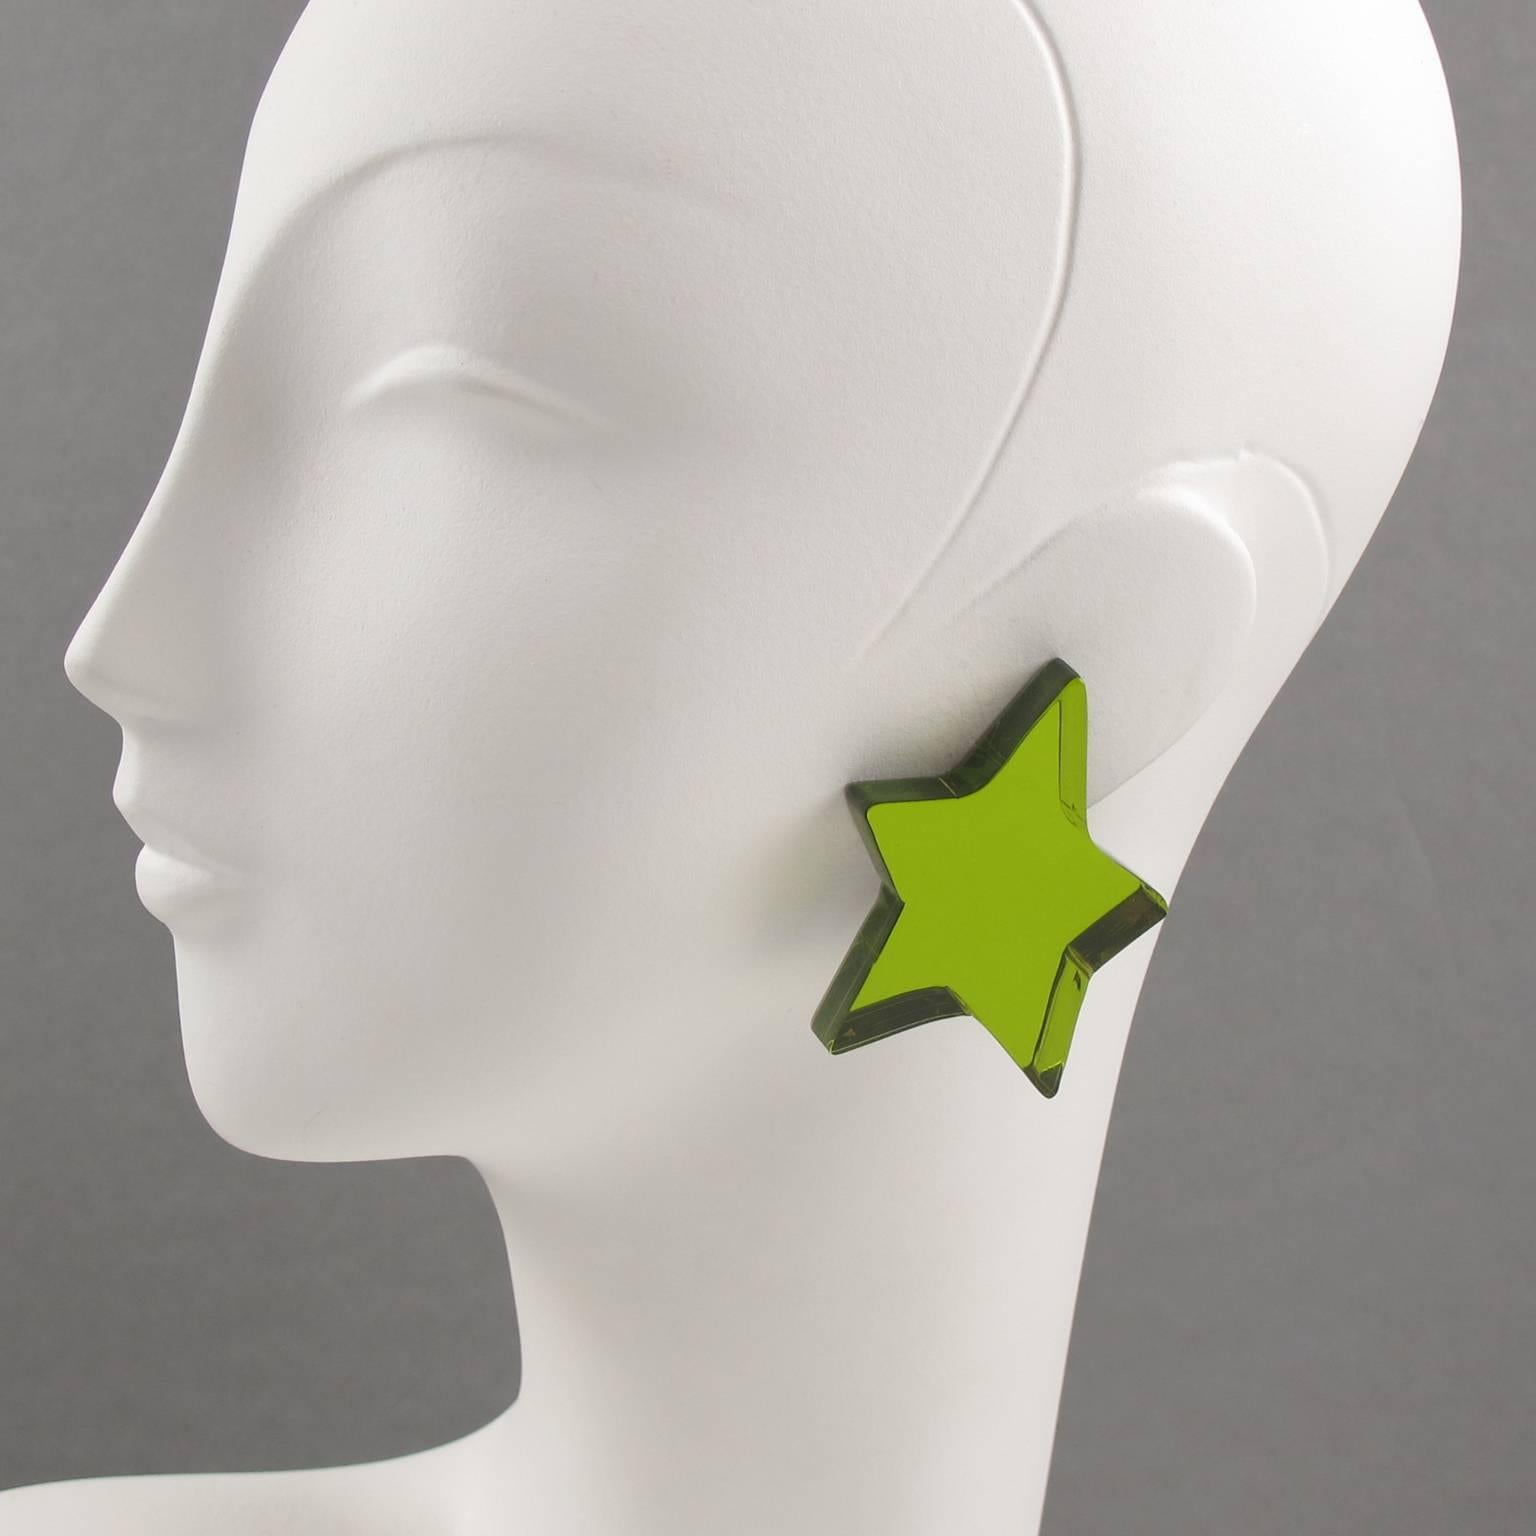 Stunning oversized Lucite clip on earrings designed by Harriet Bauknight for Kaso. Huge star shape featuring dimensional layer with olive green mirror texture pattern. Note the intense color is achieved with multilayers lamination process of clear,